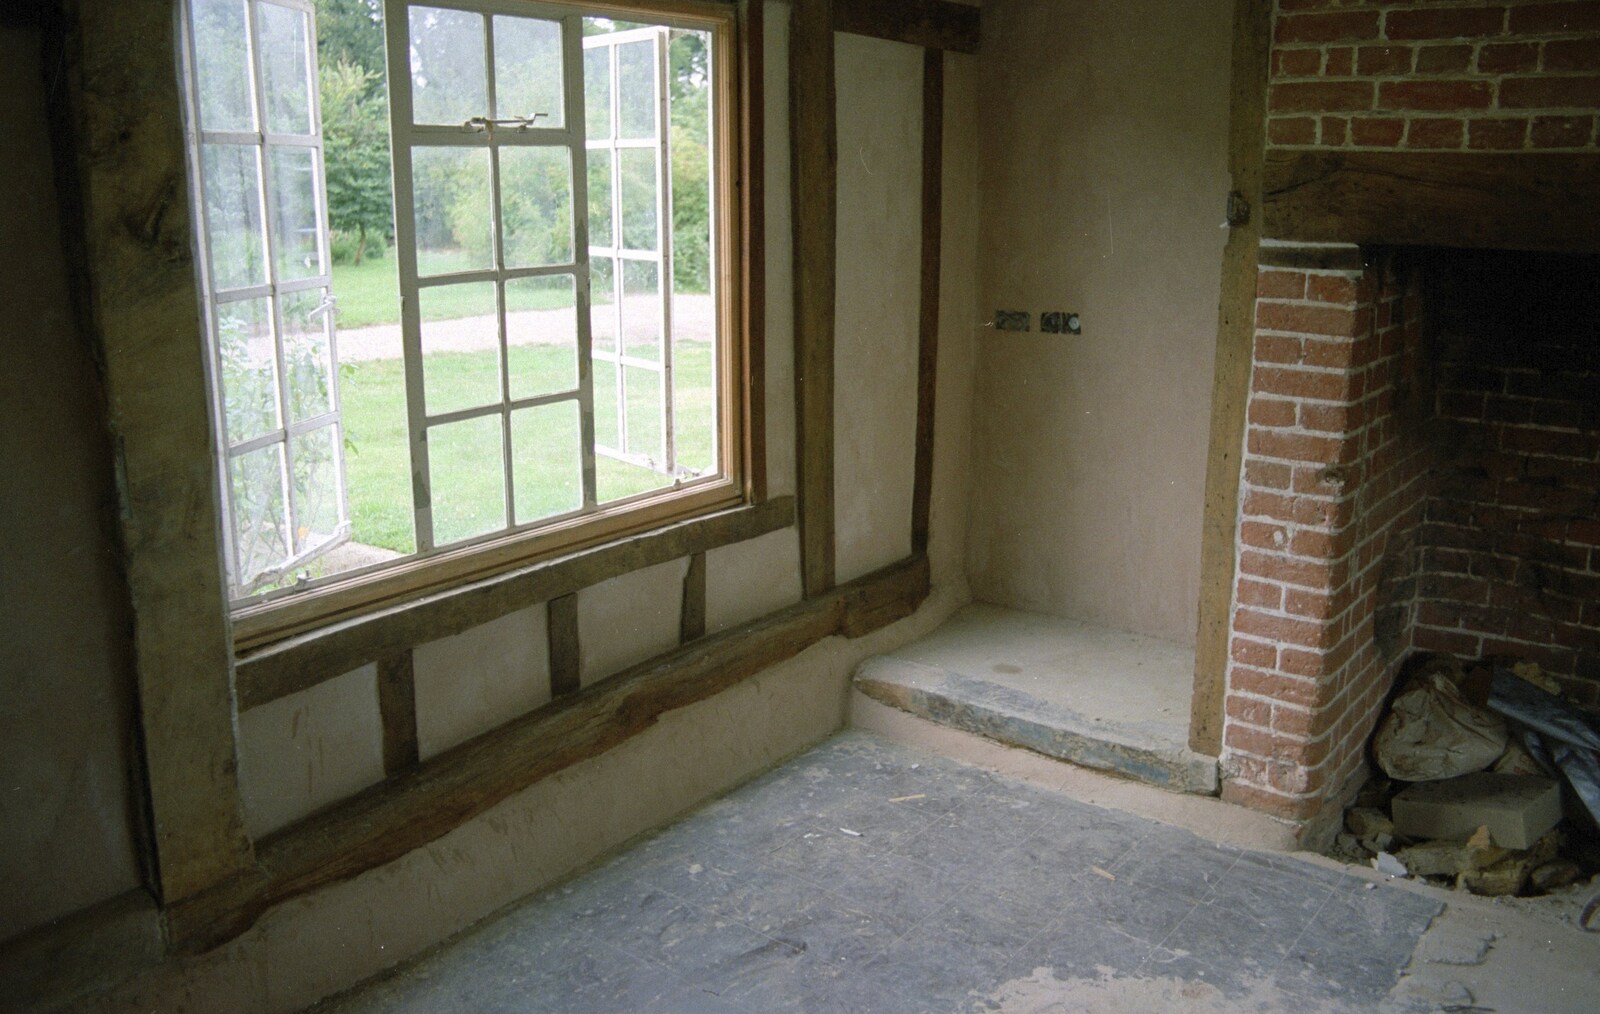 Nosher's finished plastering the lounge from Tone's Wedding, Mundford, Norfolk - 27th August 1994